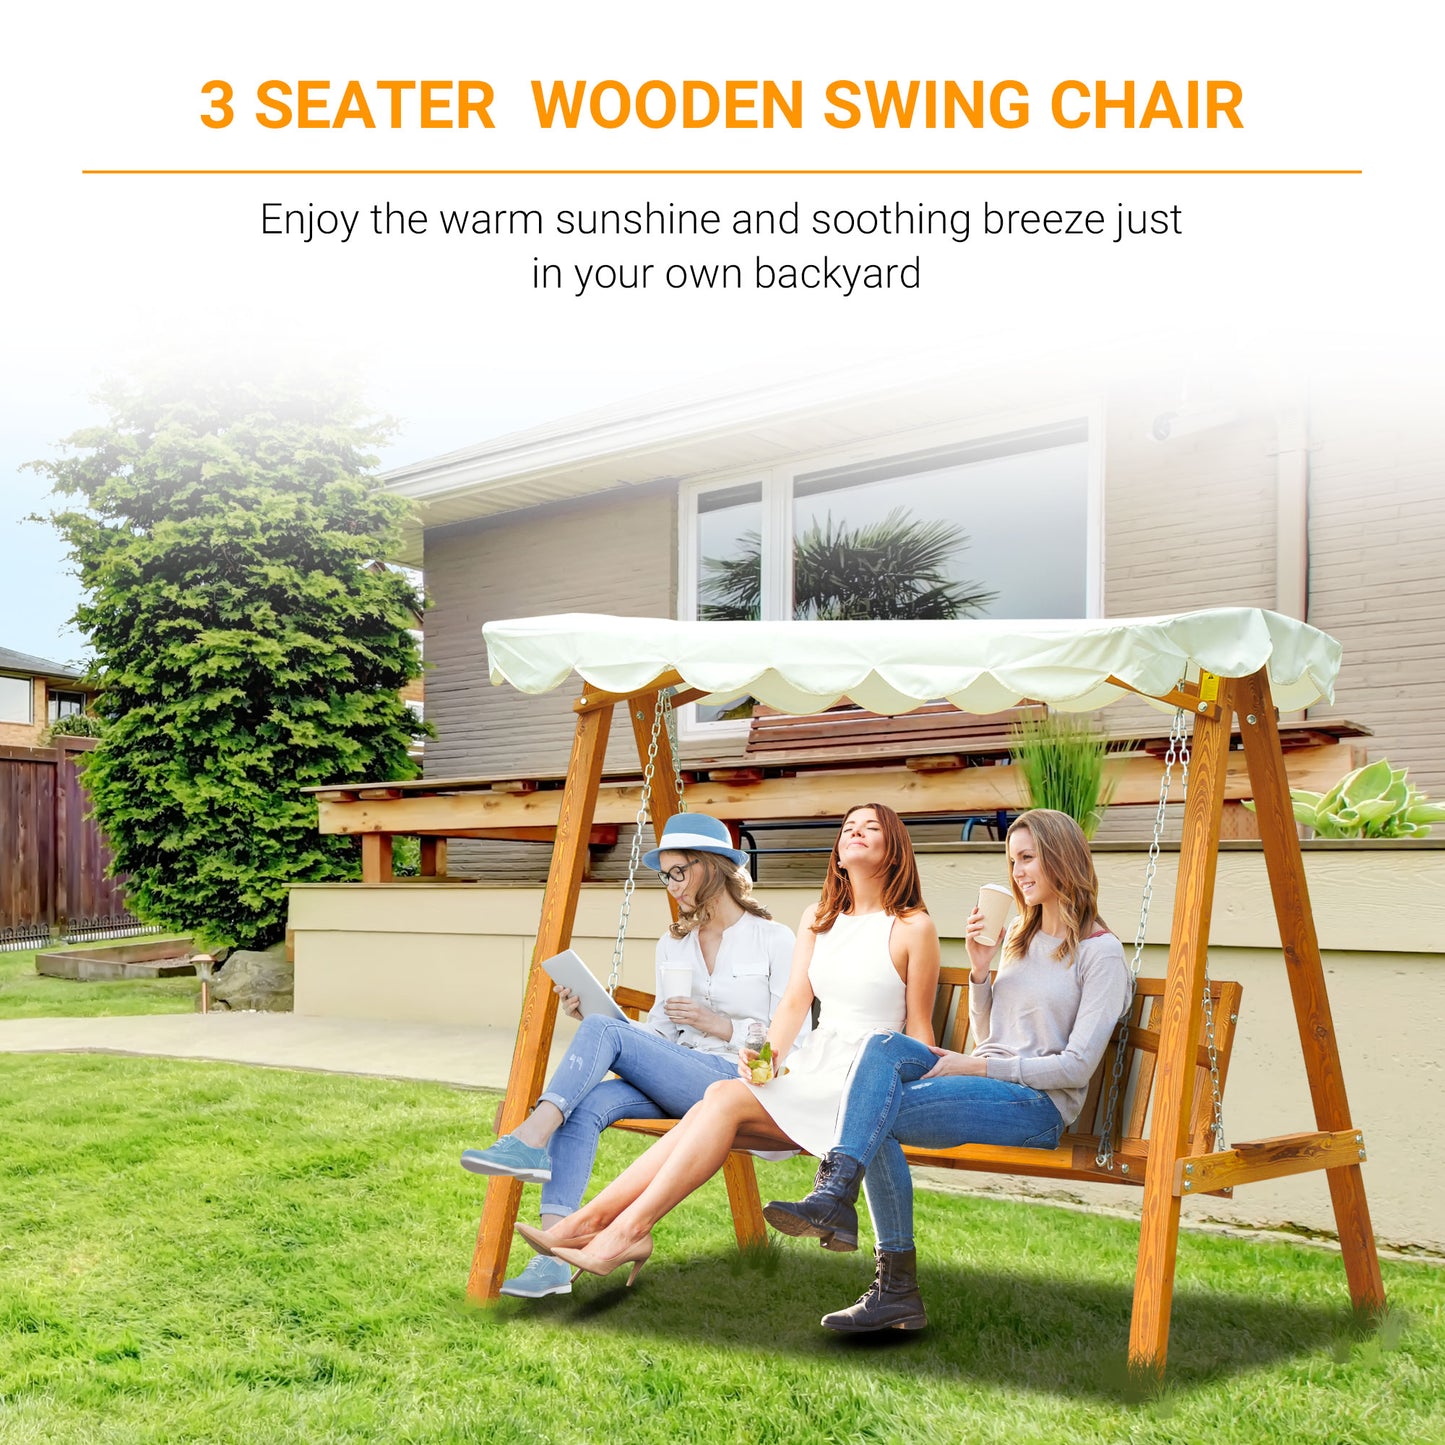 Outsunny 3-Seater Wooden Garden Swing Chair Seat Bench-Cream